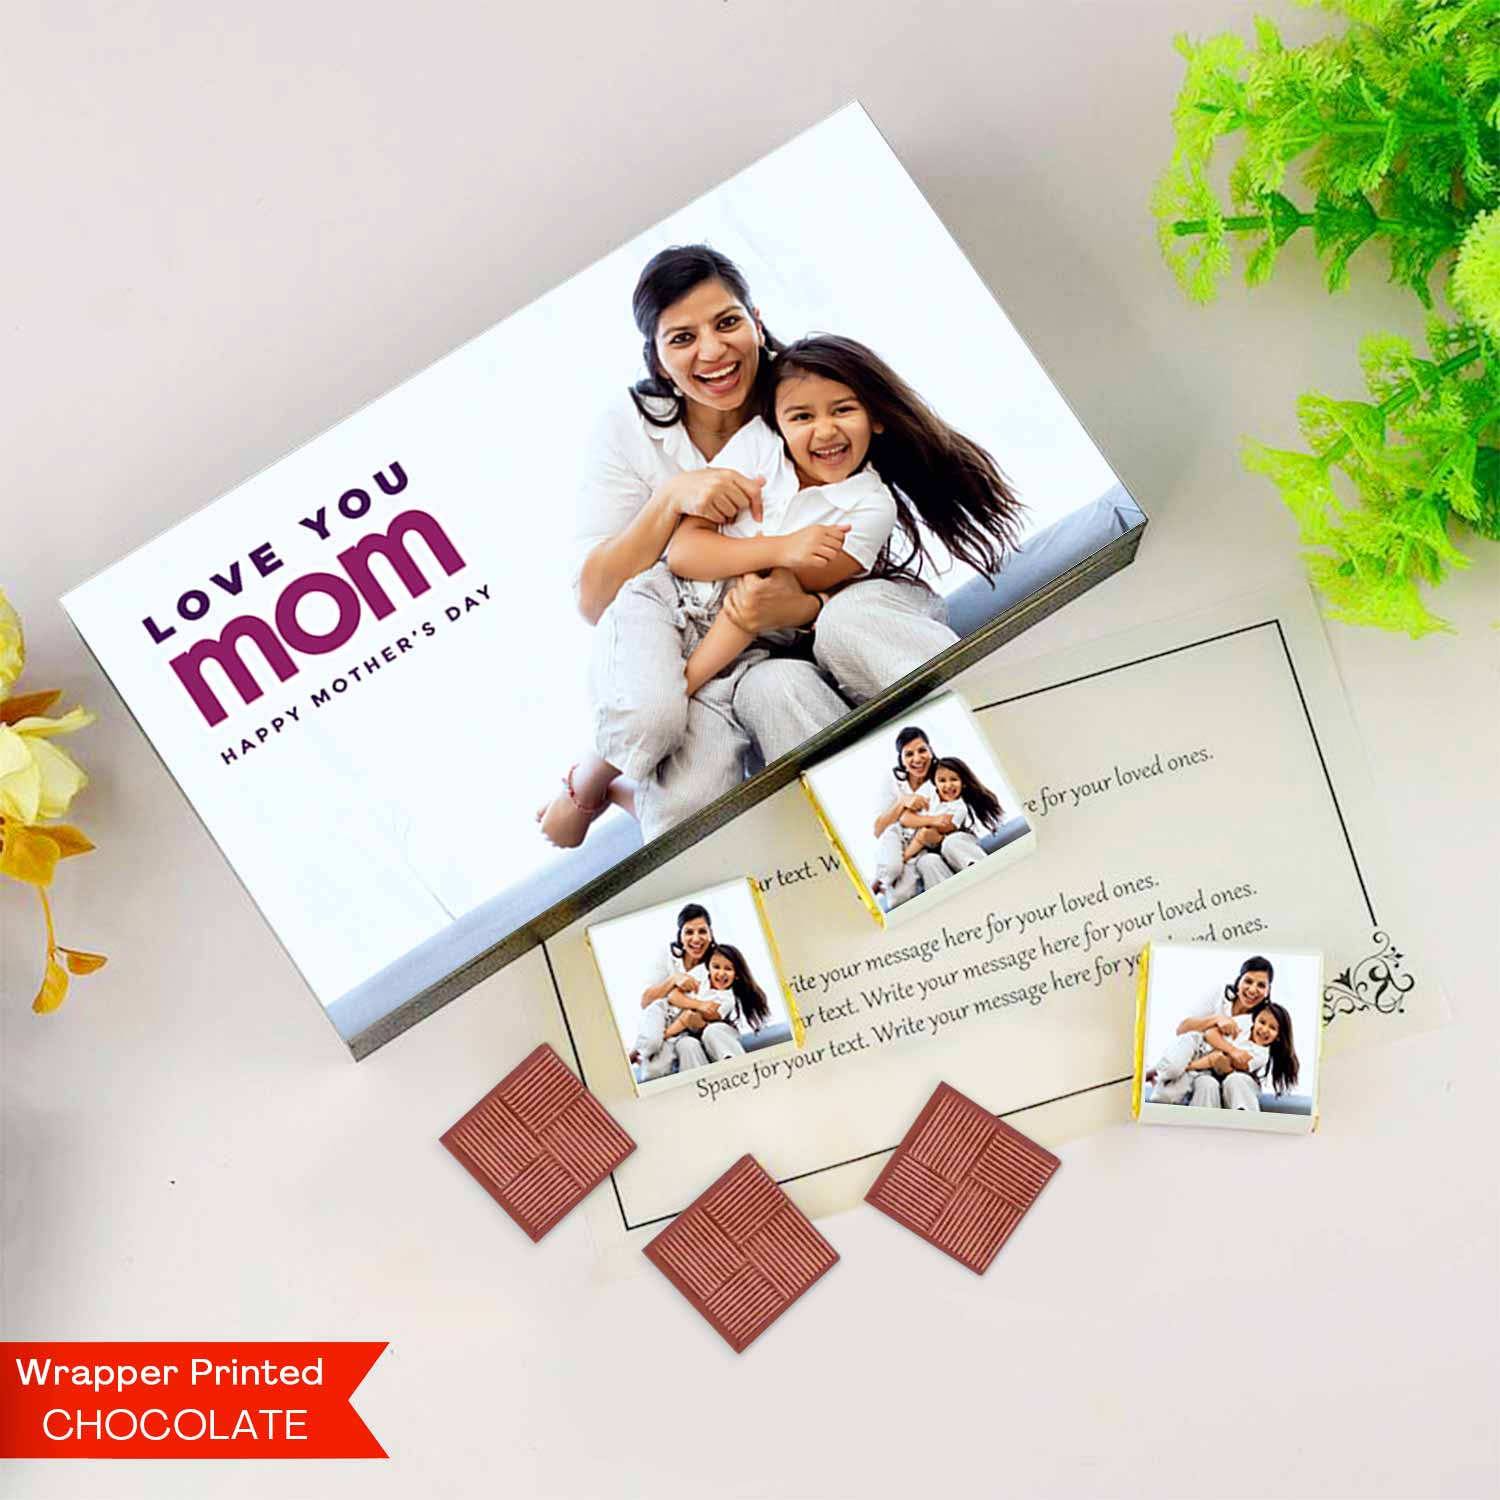 photo printed personalised gifts for mother day